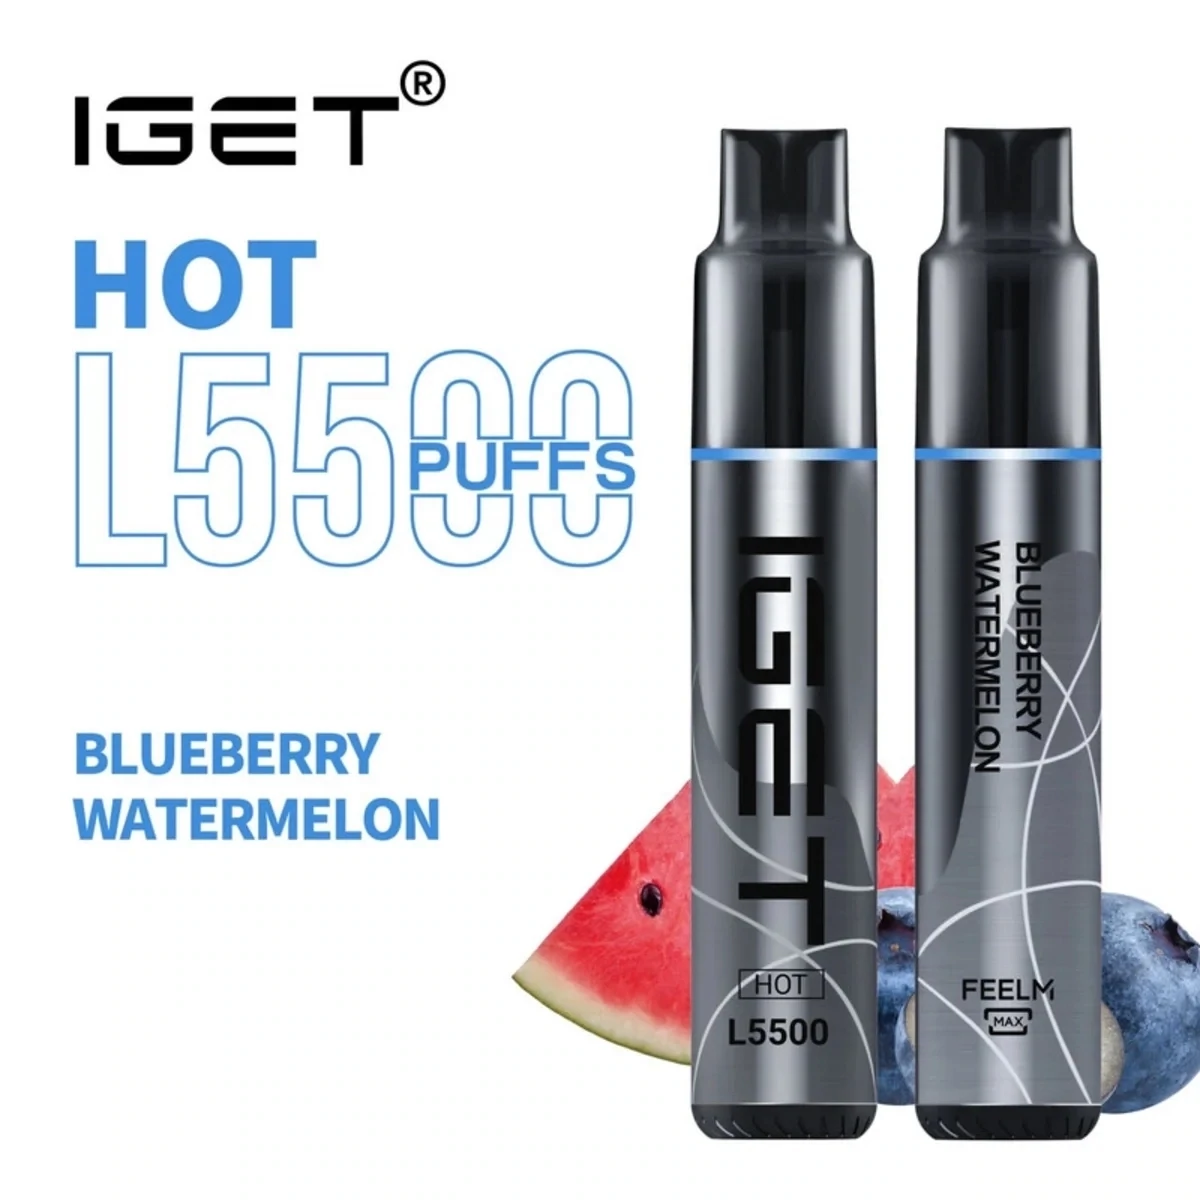 IGET Hot Blueberry watermelon 5500